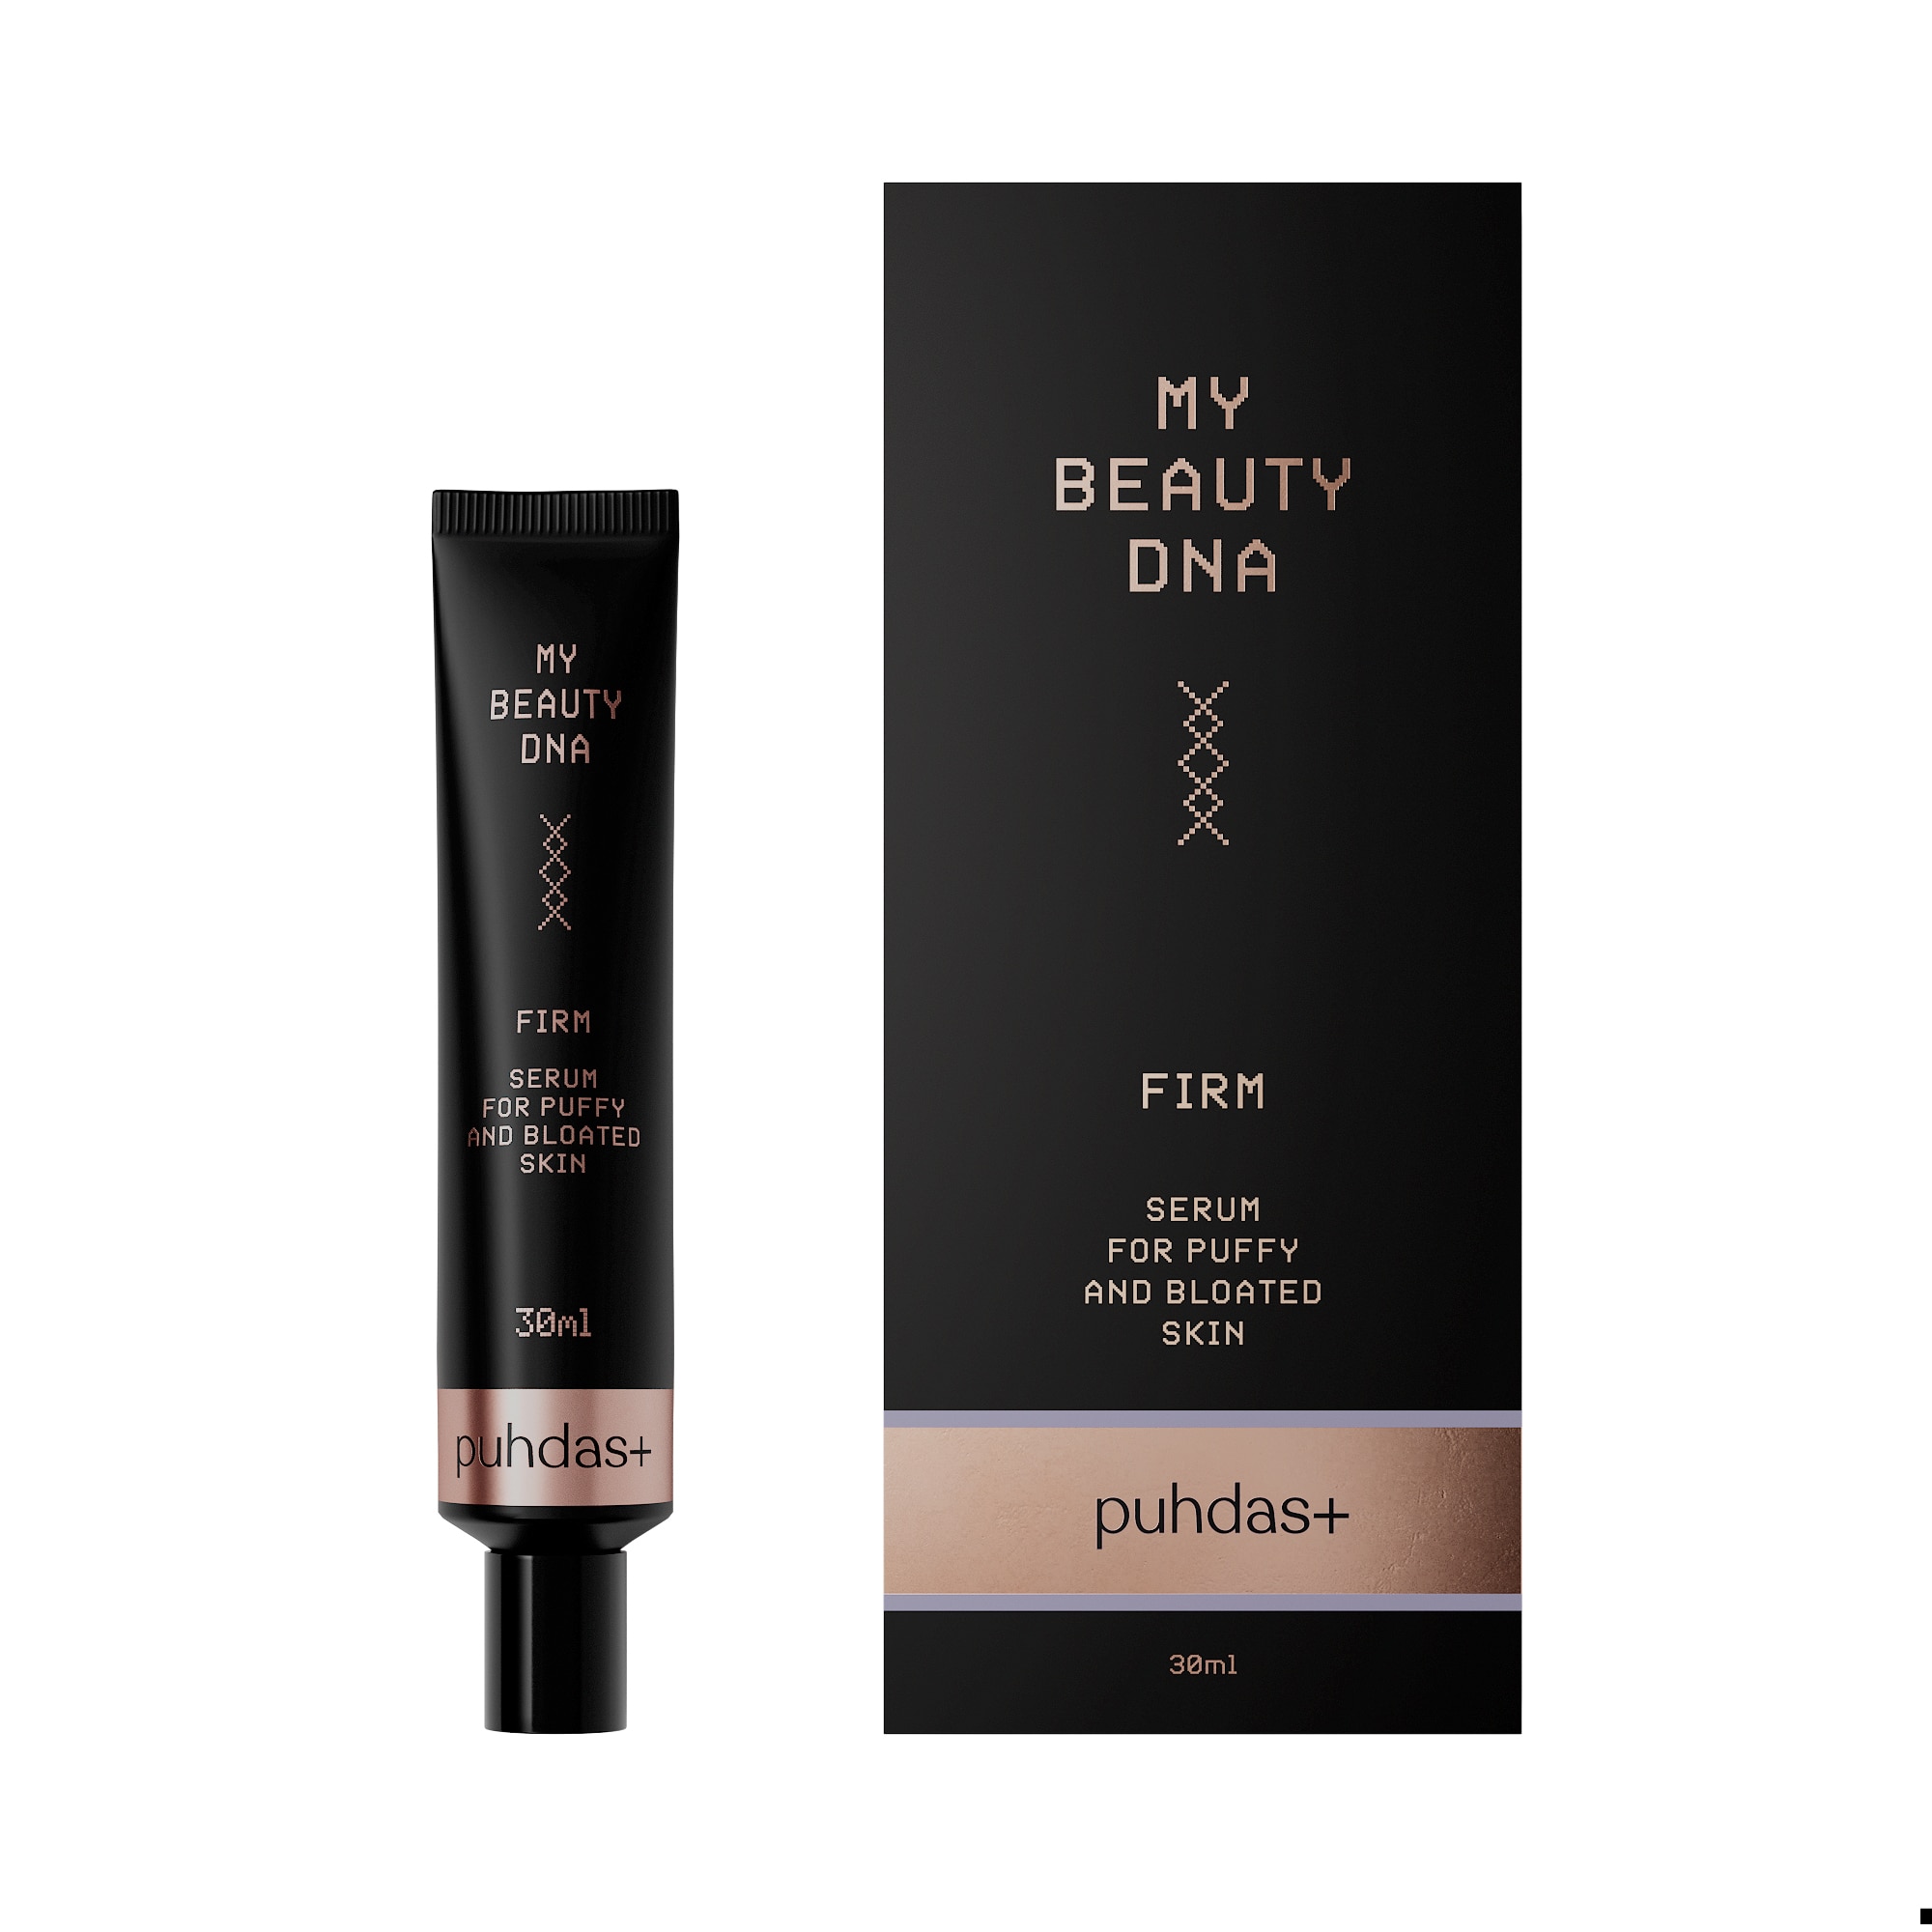 Puhdas+ Beauty DNA Firm Serum for Puffy and Bloated Skin